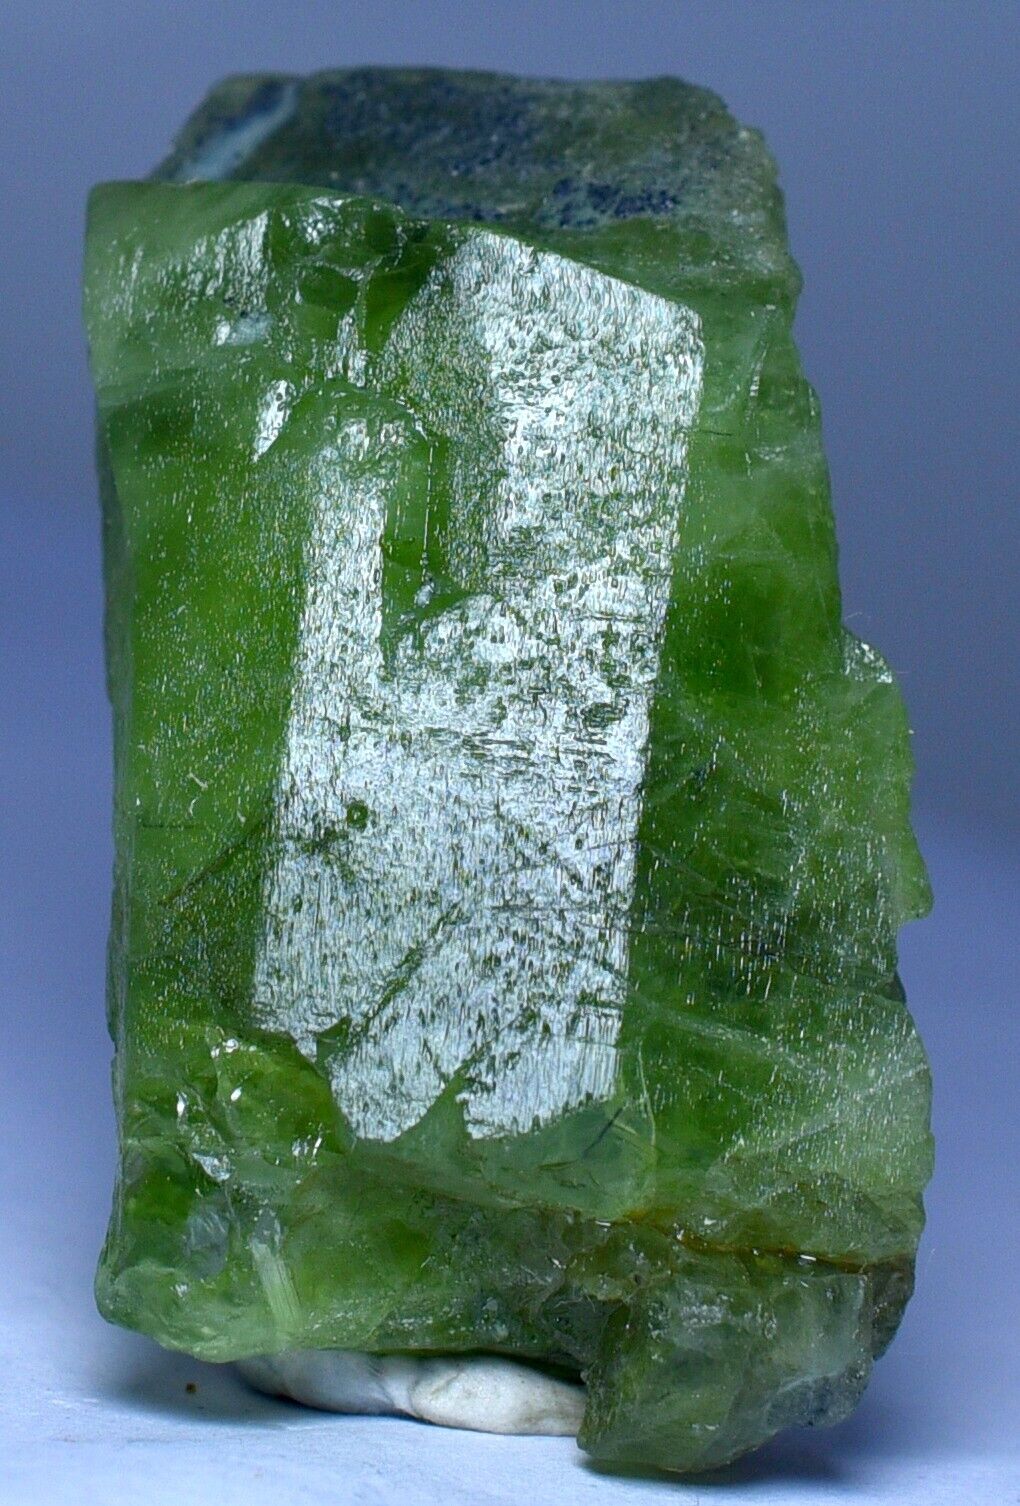 212 CT Magnificent Natural Green Peridot Crystal Specimen From Pakistan